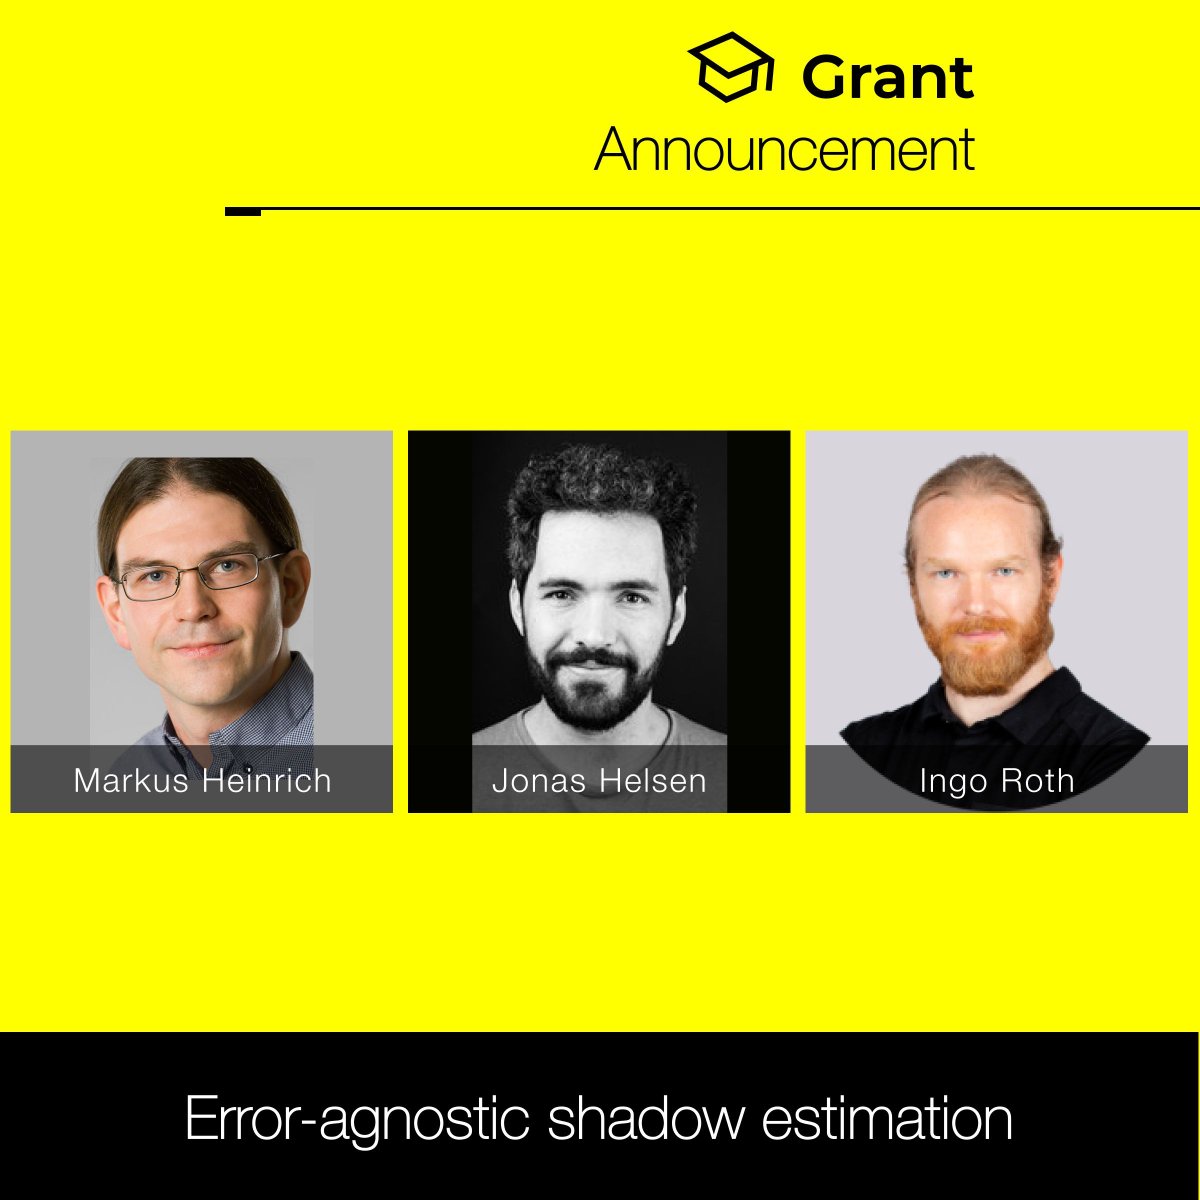 📣 Announcement!
New grant awarded to Markus Heinrich, Jonas Helsen, and Ingo Roth for the project Error-agnostic shadow estimation.
🎓 Learn more about our UF Grants here: buff.ly/3sjndUG
📝 Apply for a microgrant here: buff.ly/3SUbS8X